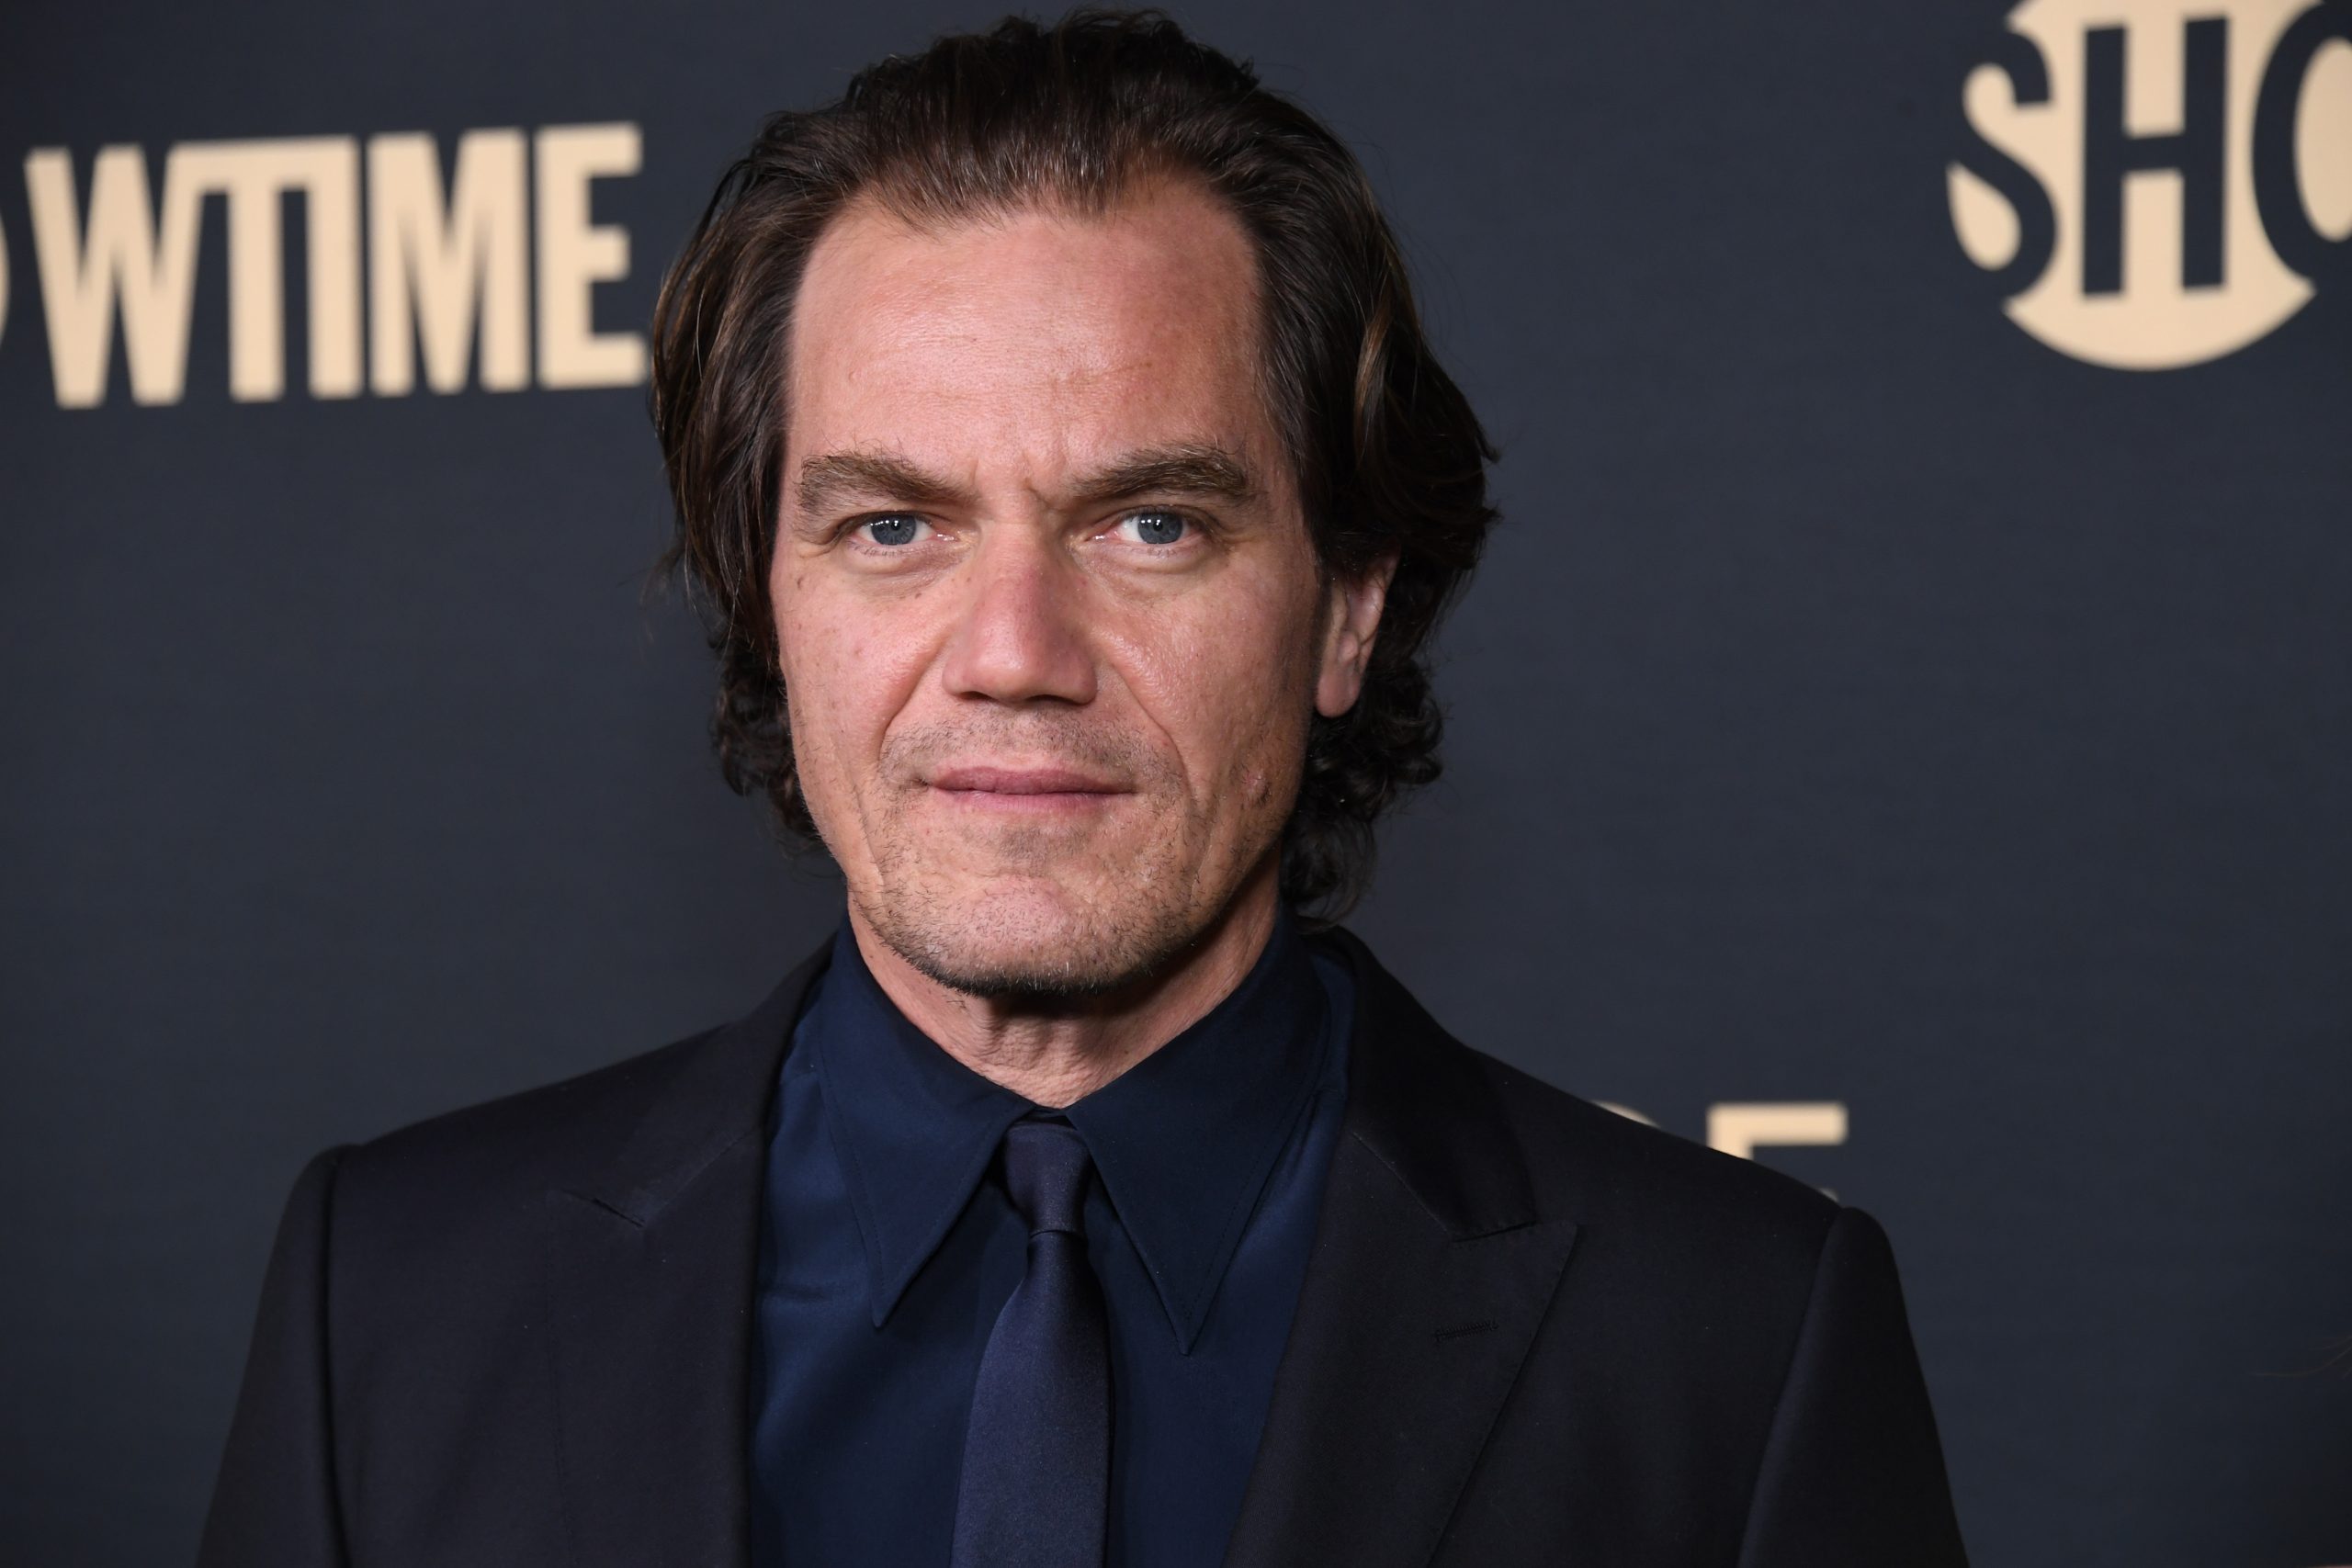 LOS ANGELES, CALIFORNIA - NOVEMBER 21: Michael Shannon attends Showtime's "George & Tammy" Premiere Event at Goya Studios on November 21, 2022 in Los Angeles, California. (Photo by Jon Kopaloff/Getty Images)